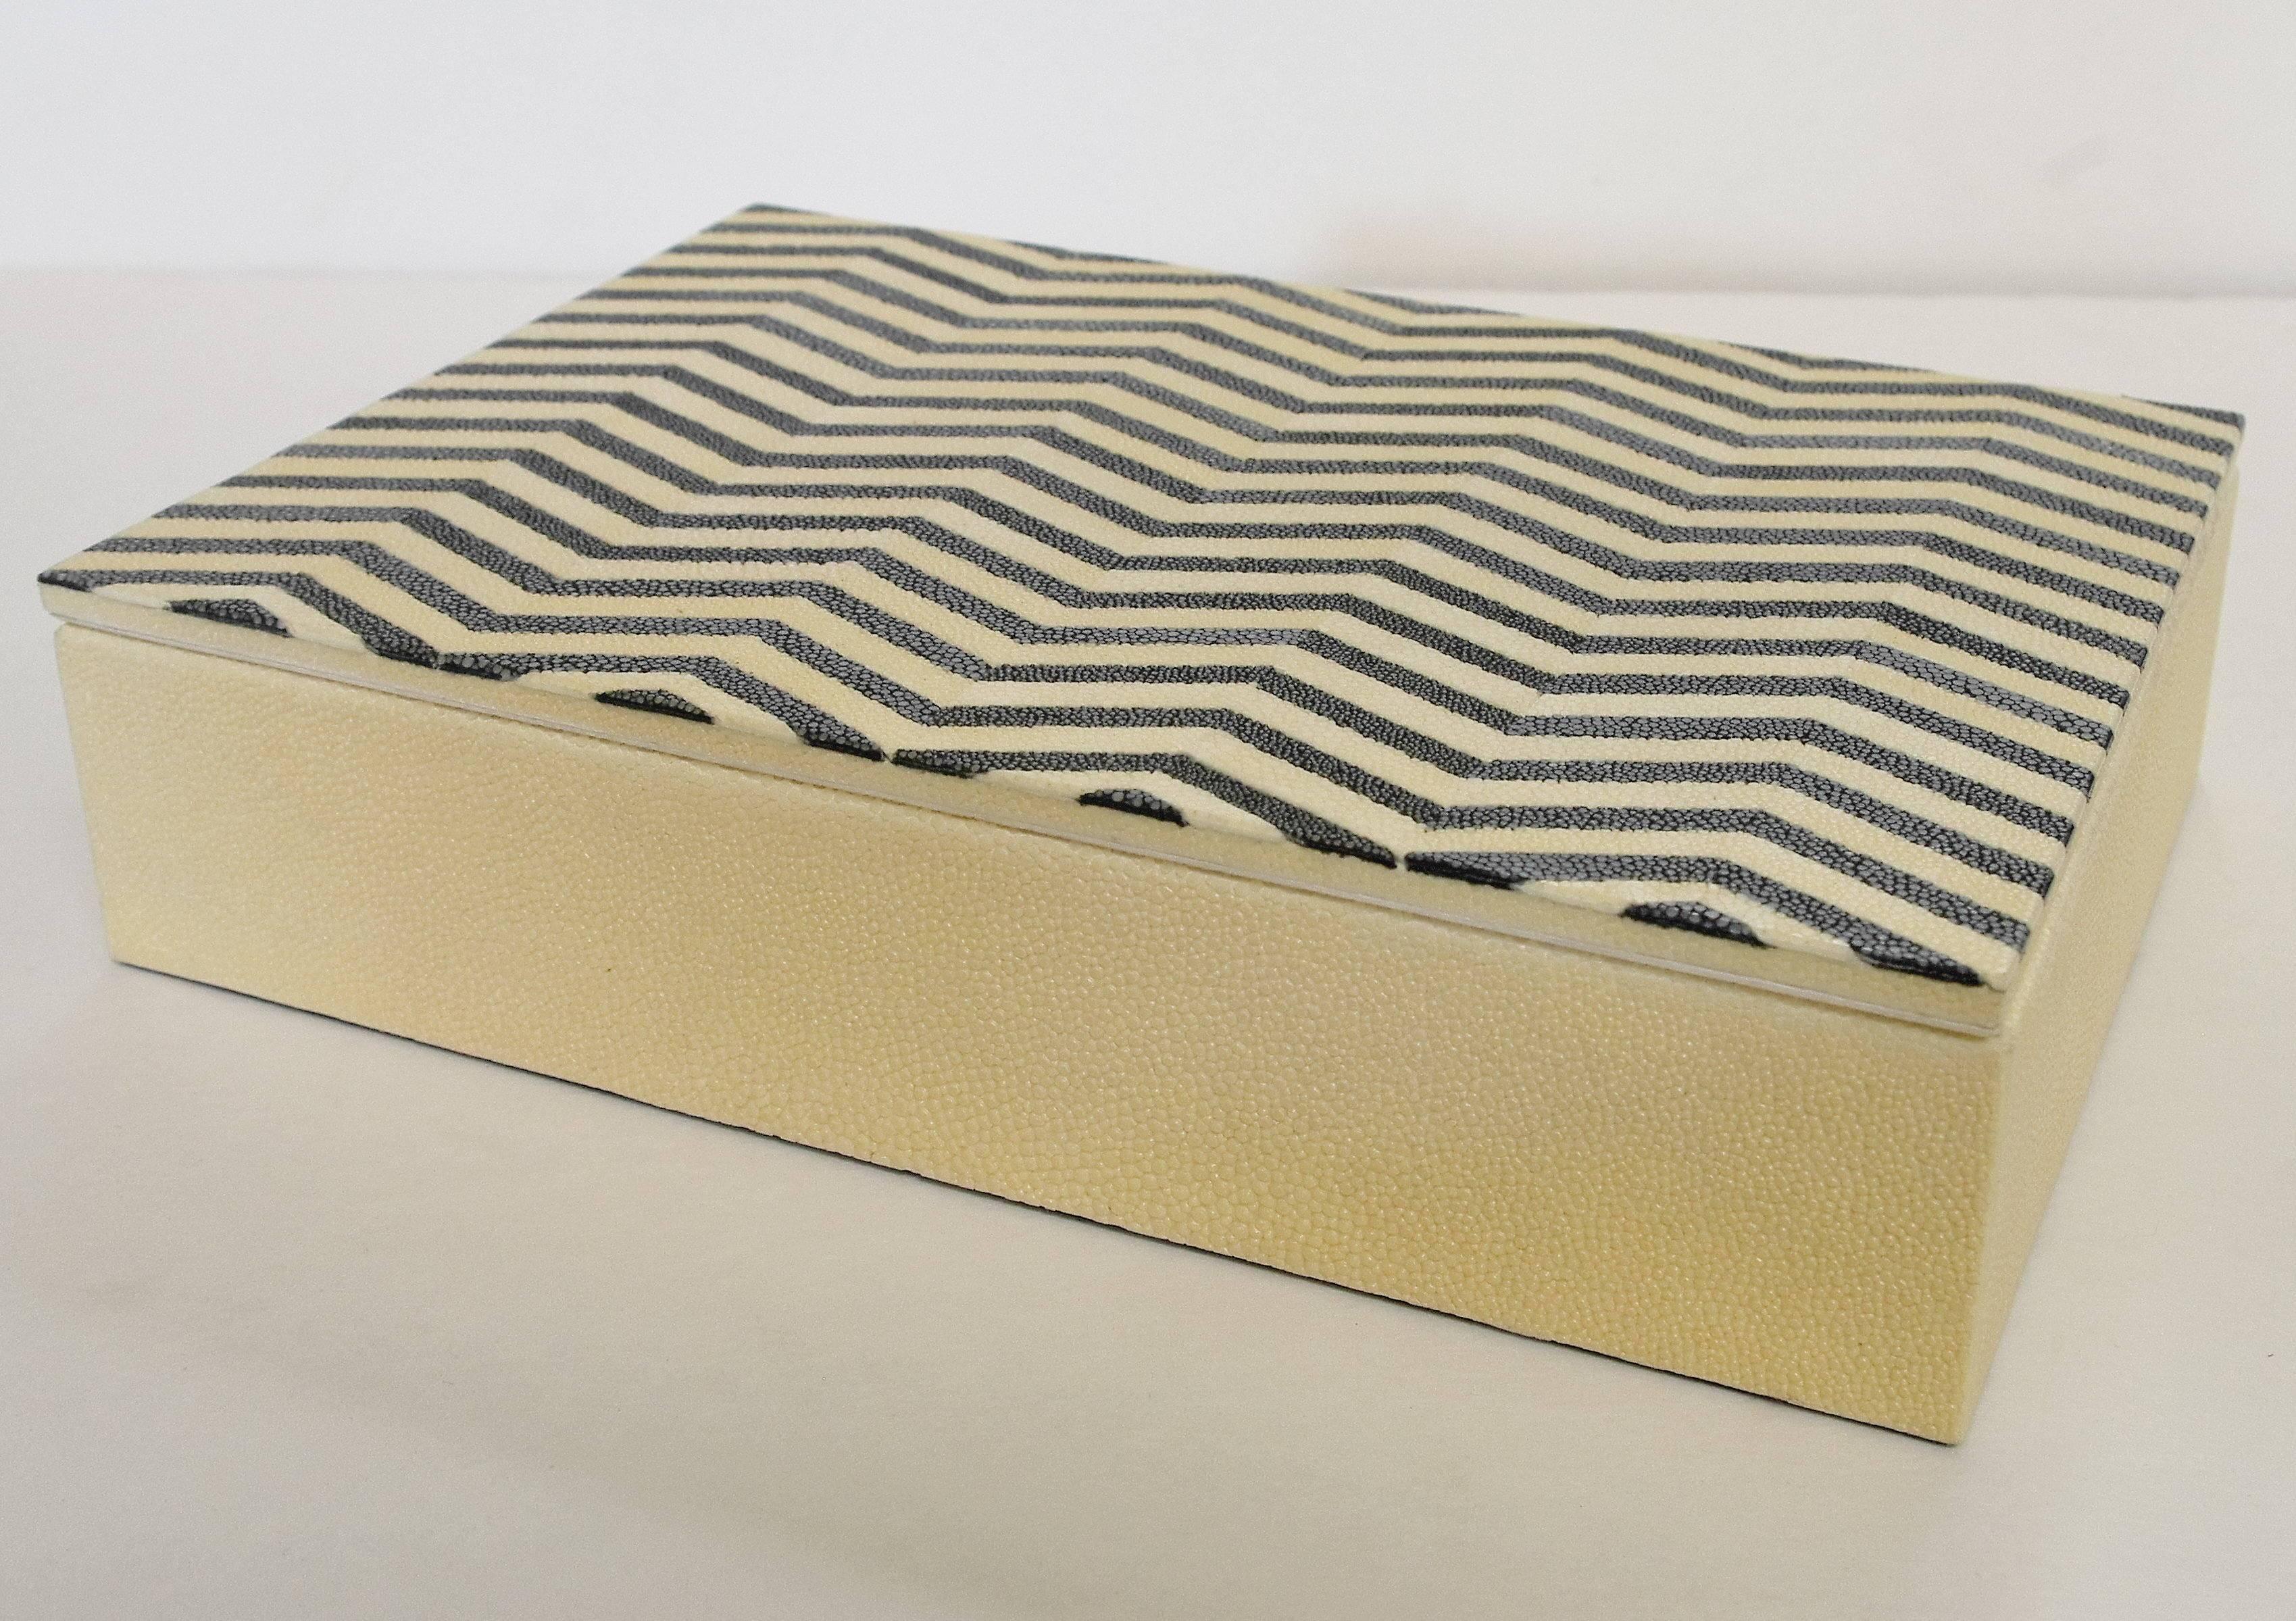 Ivory and black shagreen box with zigzag pattern and gray suede interior 
Measures: Width 10 inches, depth 7 inches, height 2.5 inches
1 in stock in Palm Springs ON FINAL CLEARANCE SALE for $595 !!! 
Order Reference #: FABIOLTD MR63
This piece makes